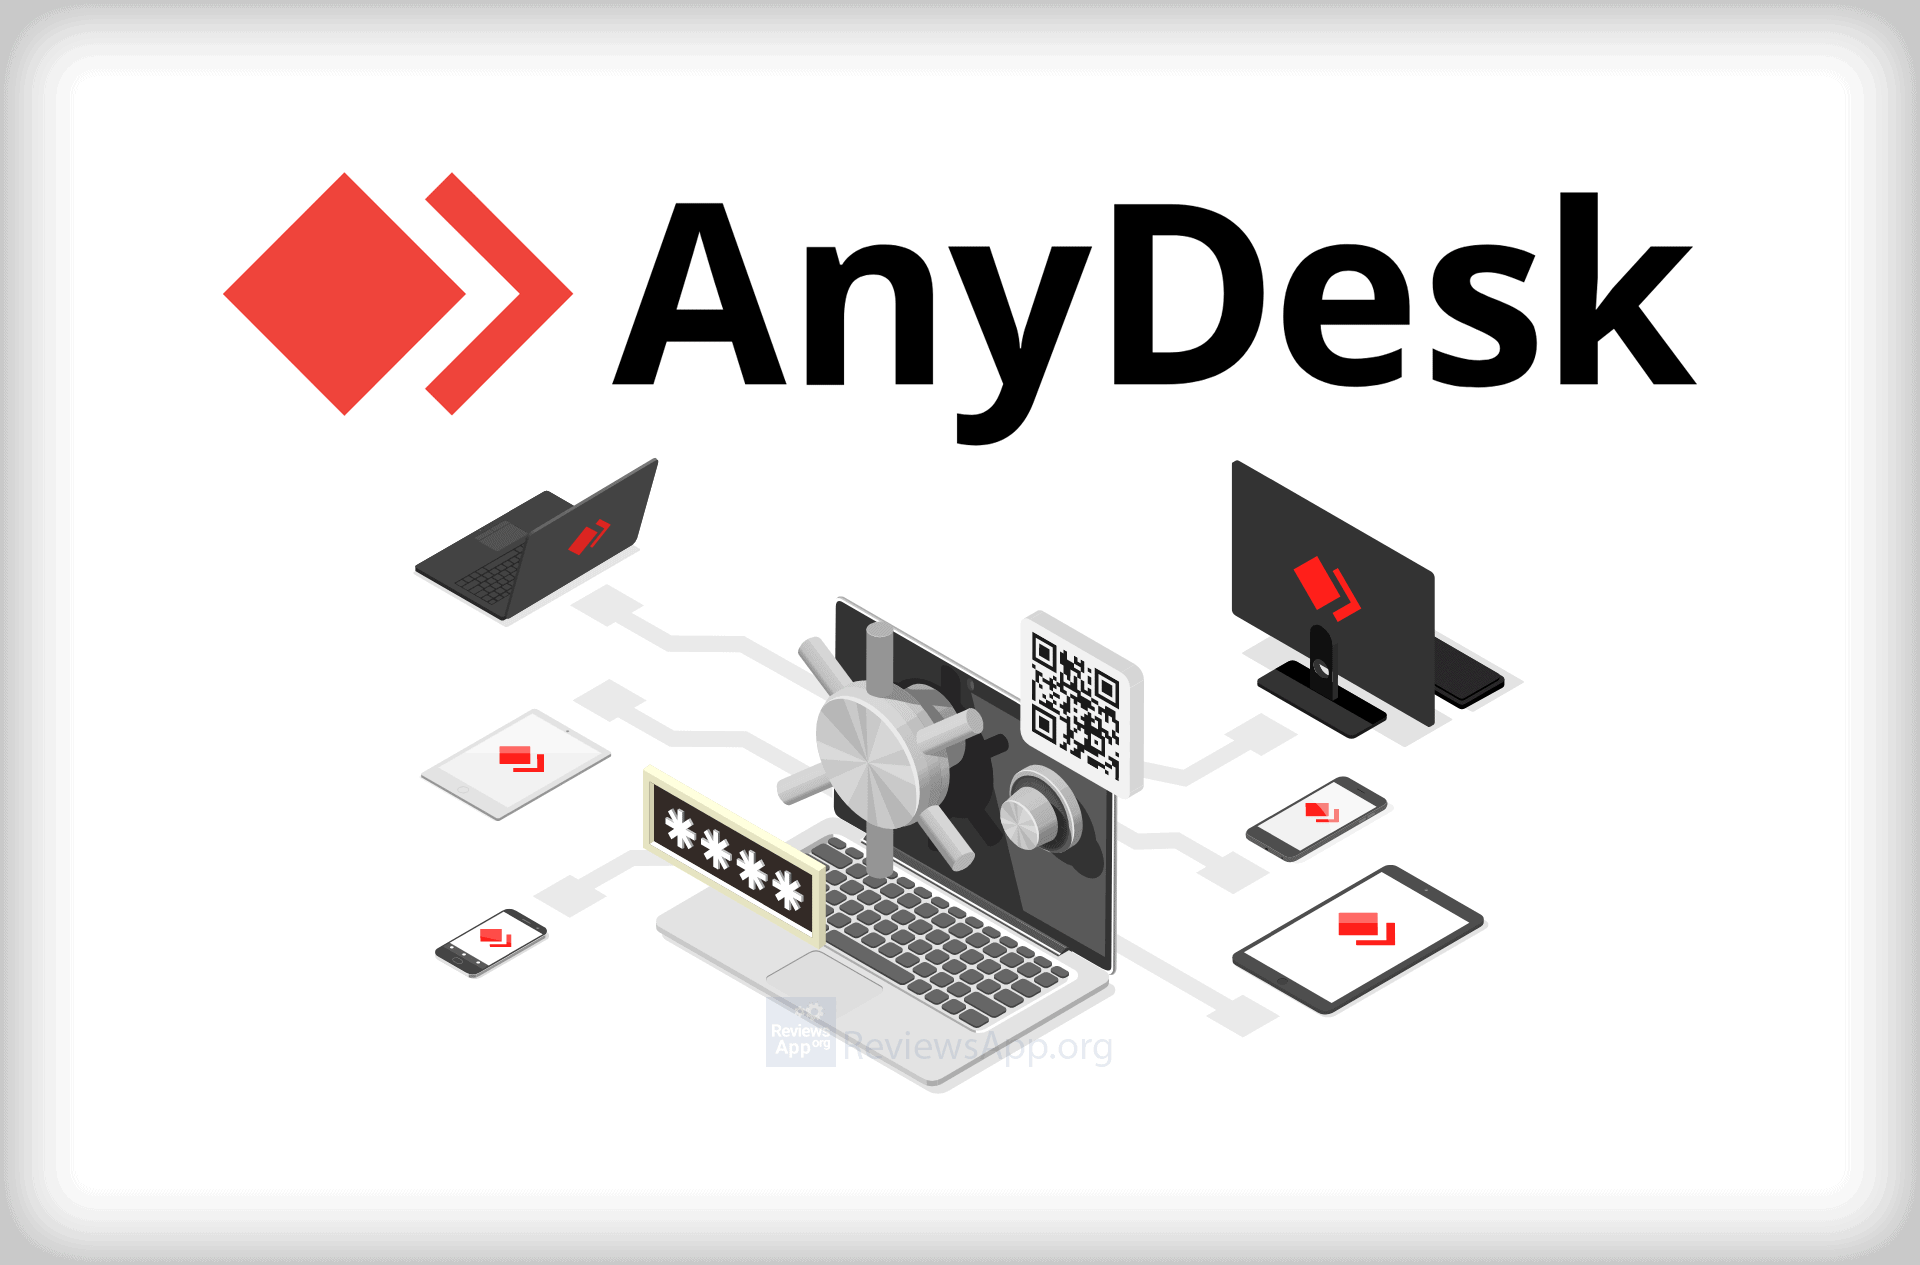 about anydesk app